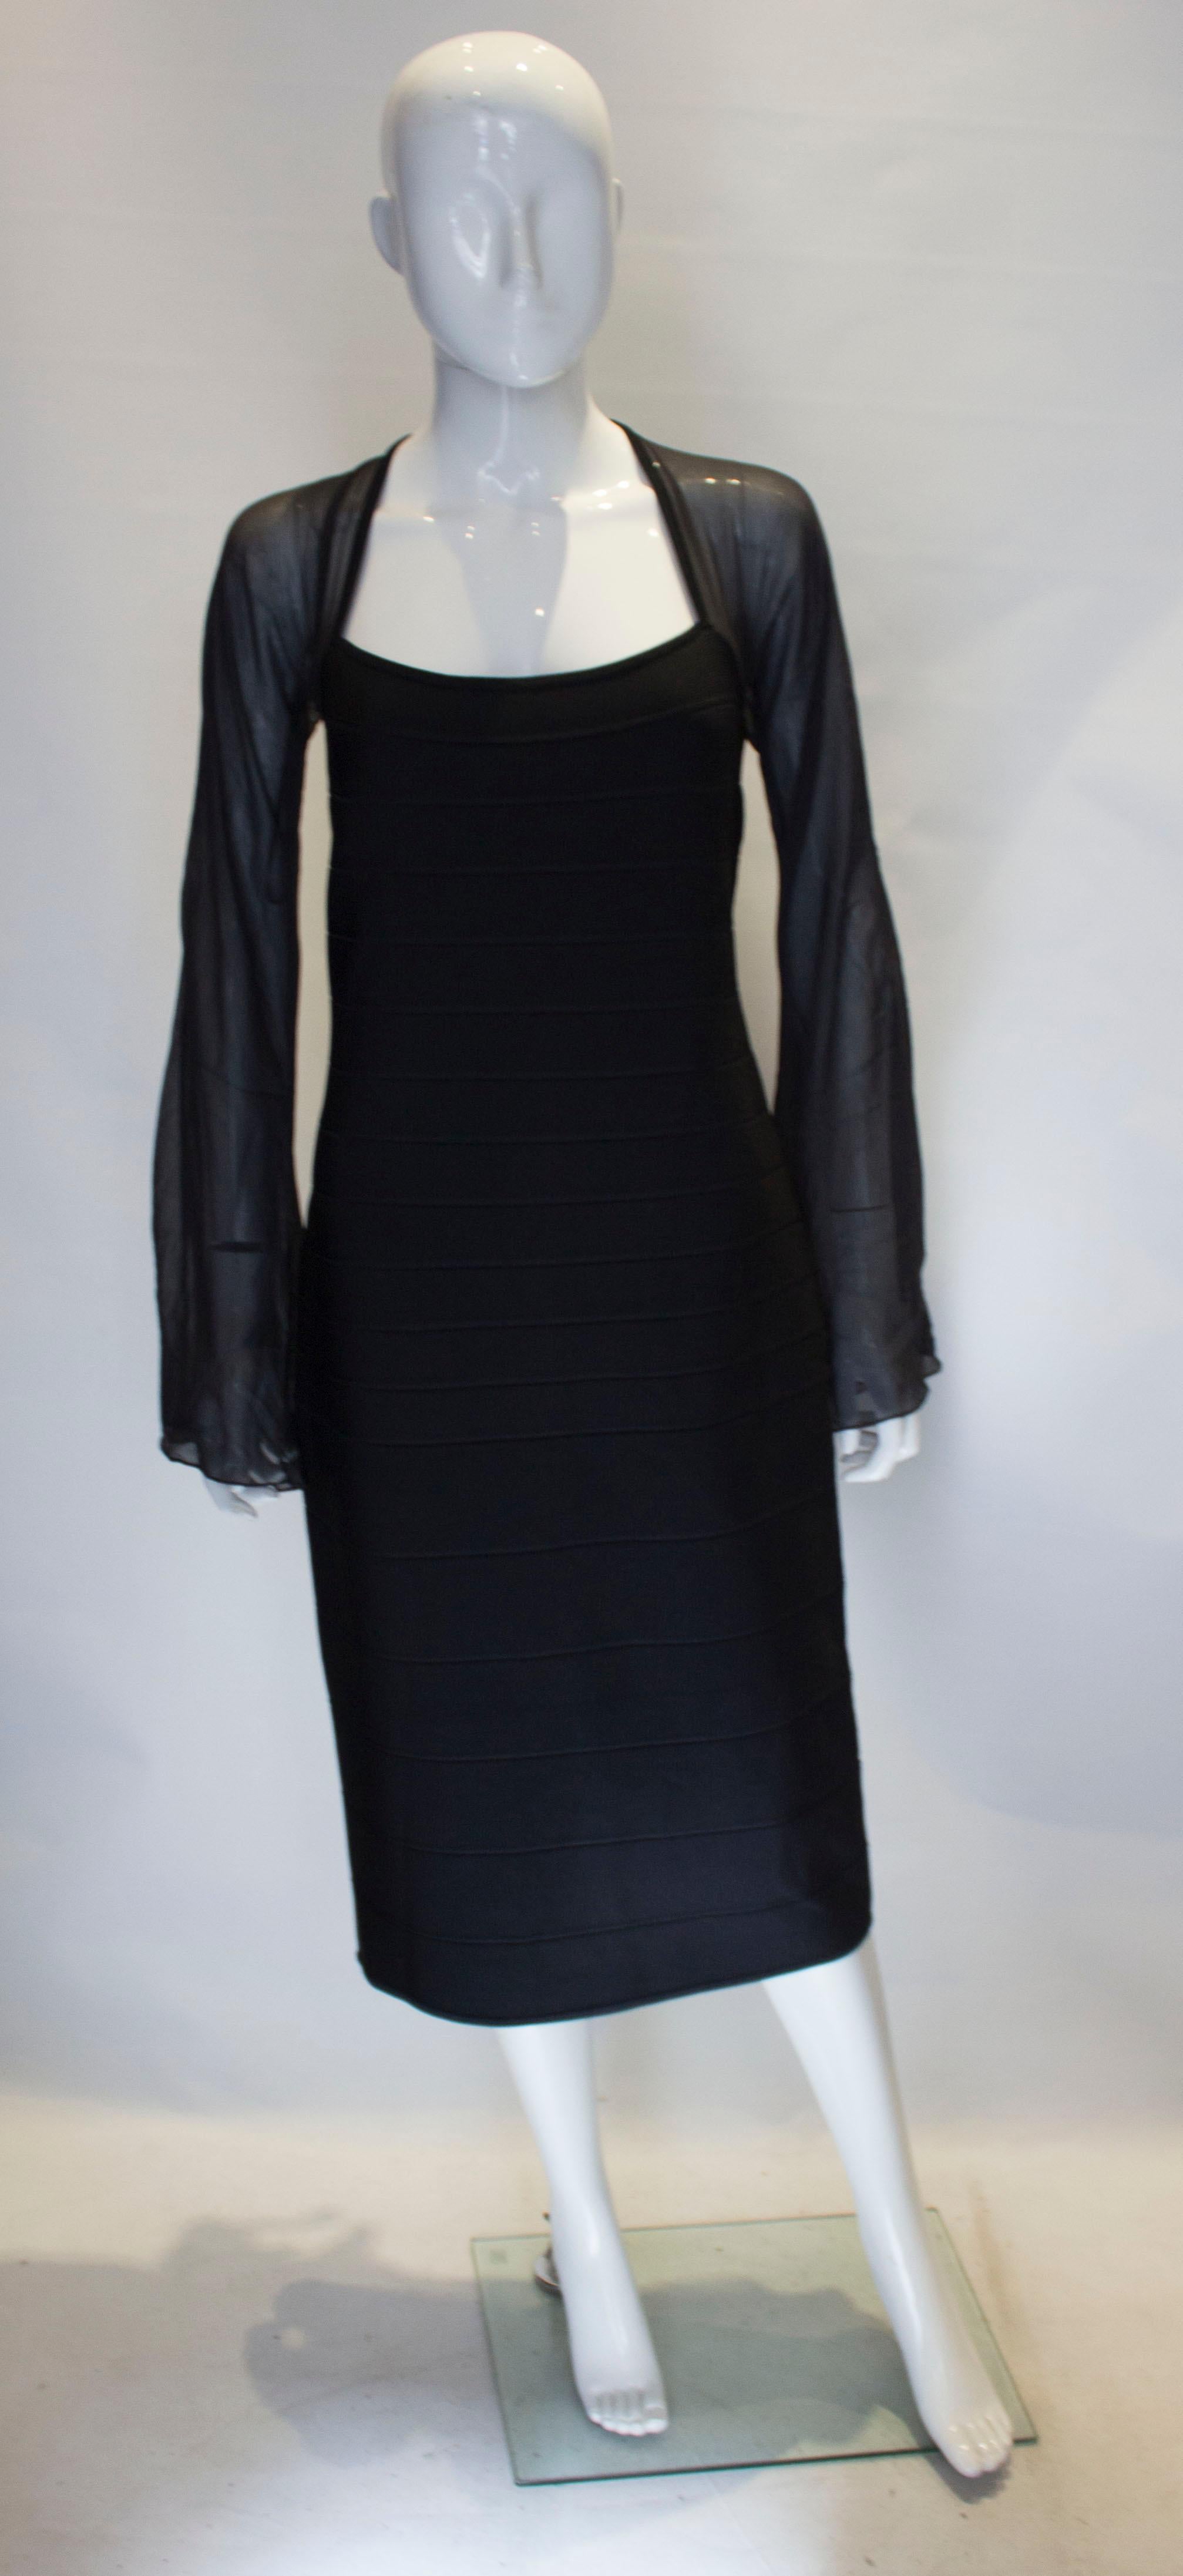 A chic Herve Leger dress  in black . This dress is unusual having long sleeves. It has a square neckline, and central back zip. The size has a some stretch.